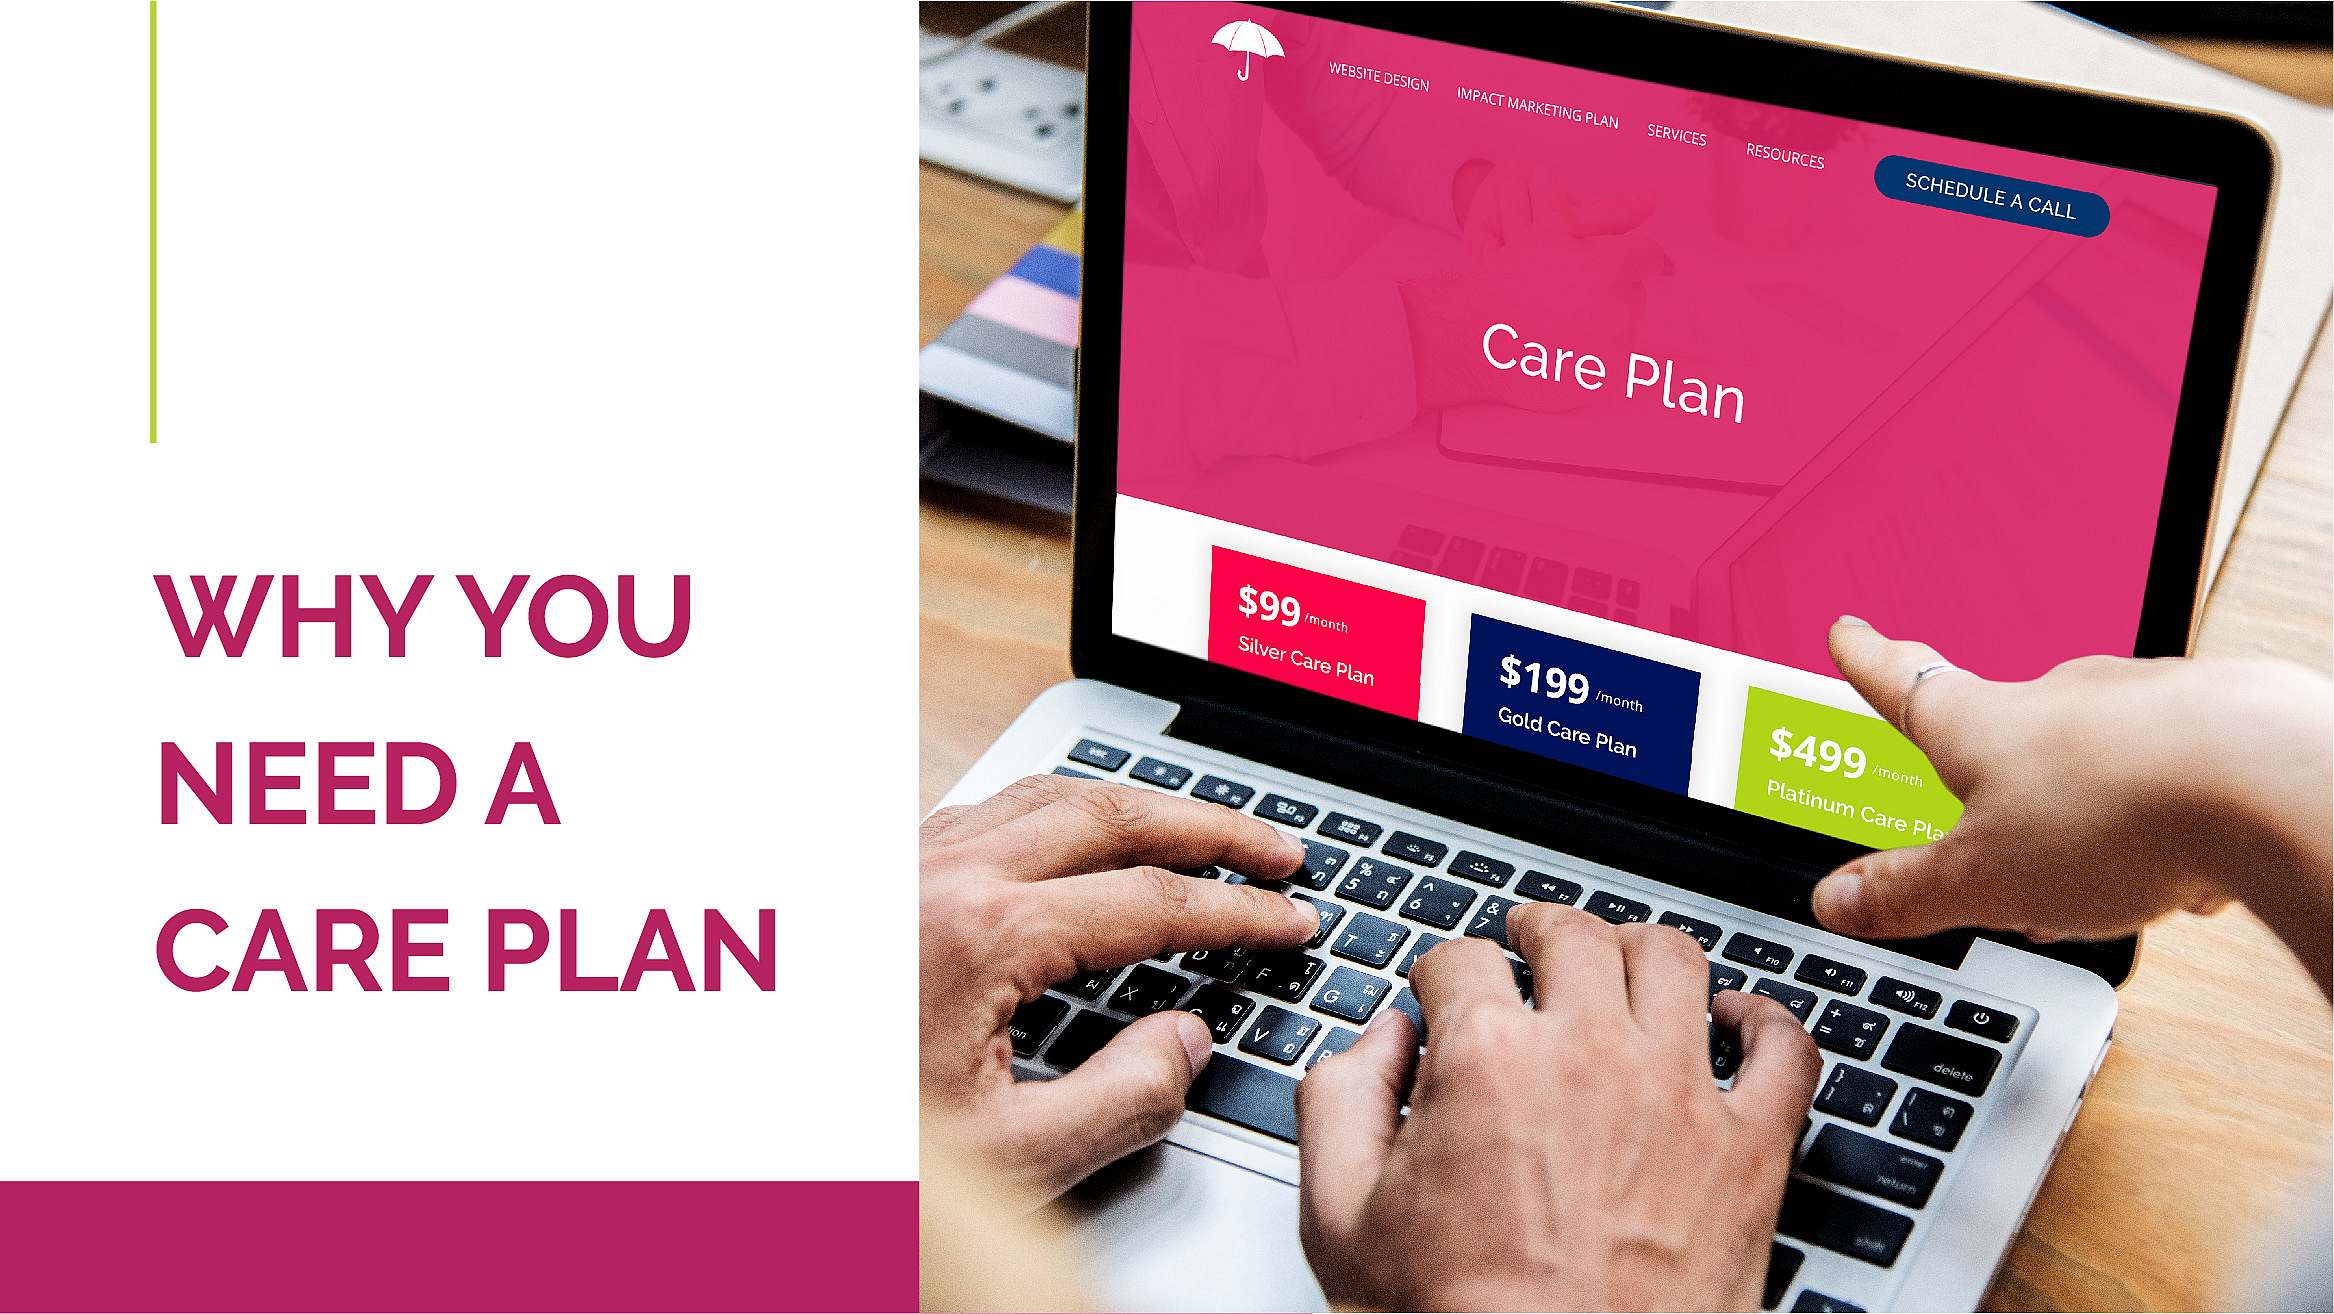 You need care plan to take care of your site